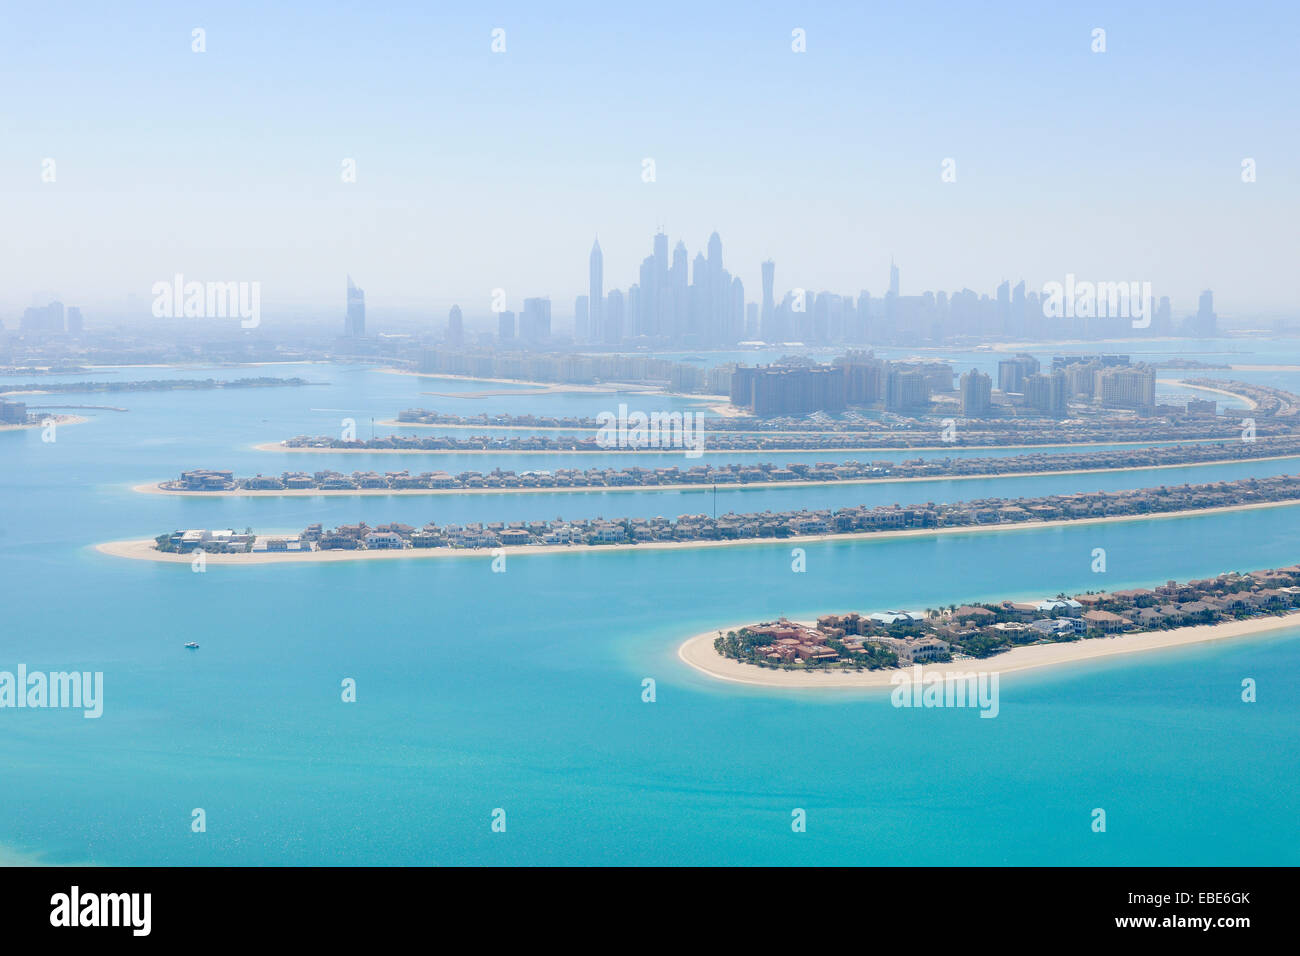 Aerial View of Palm Jumeirah with Skyscrapers in background, Dubai, United Arab Emirates Stock Photo